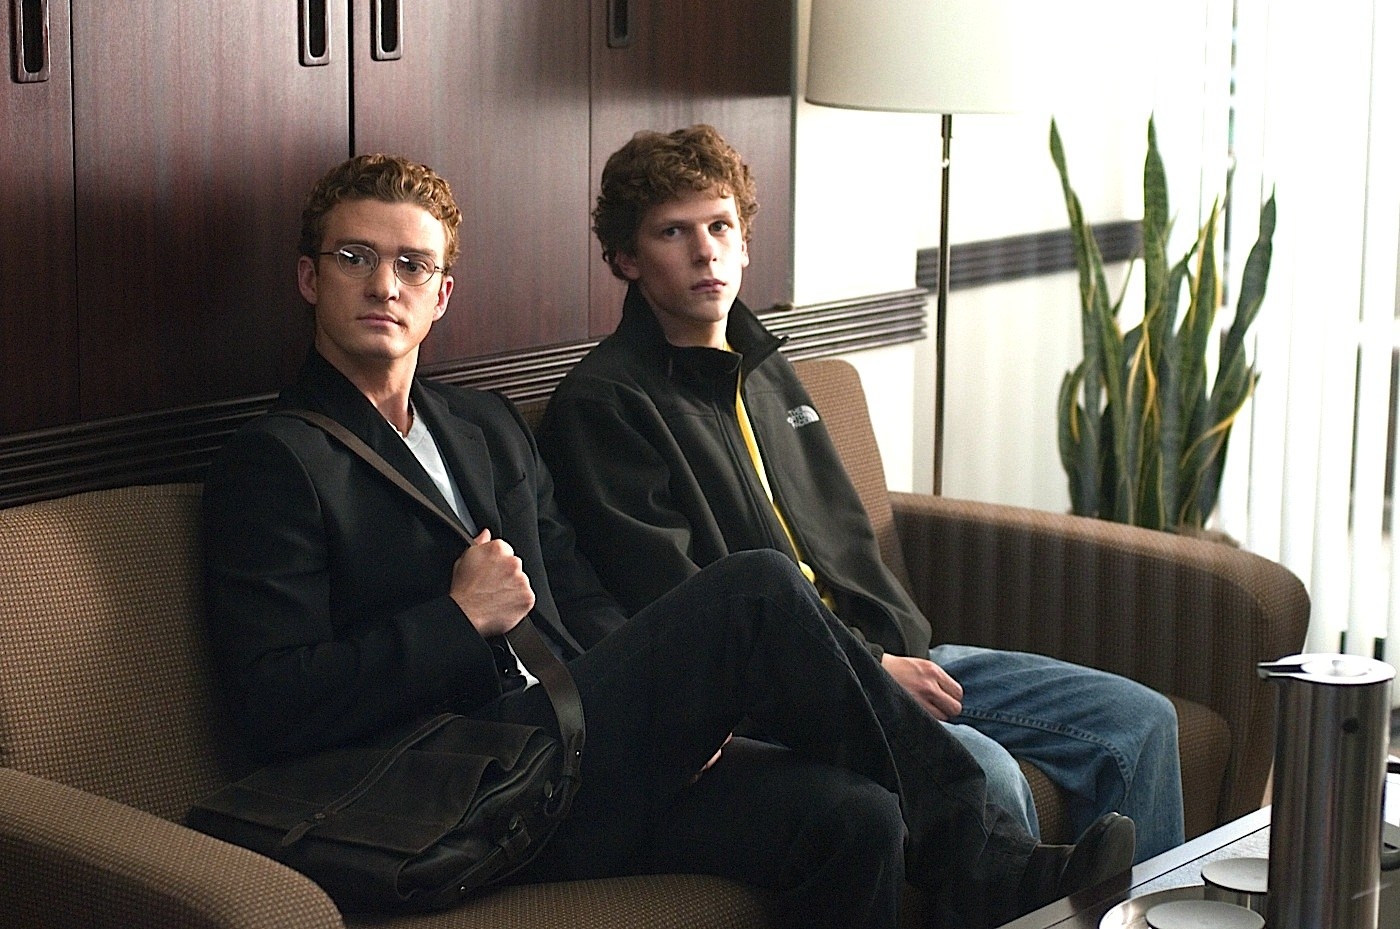 Screenshot from &quot;The Social Network&quot;